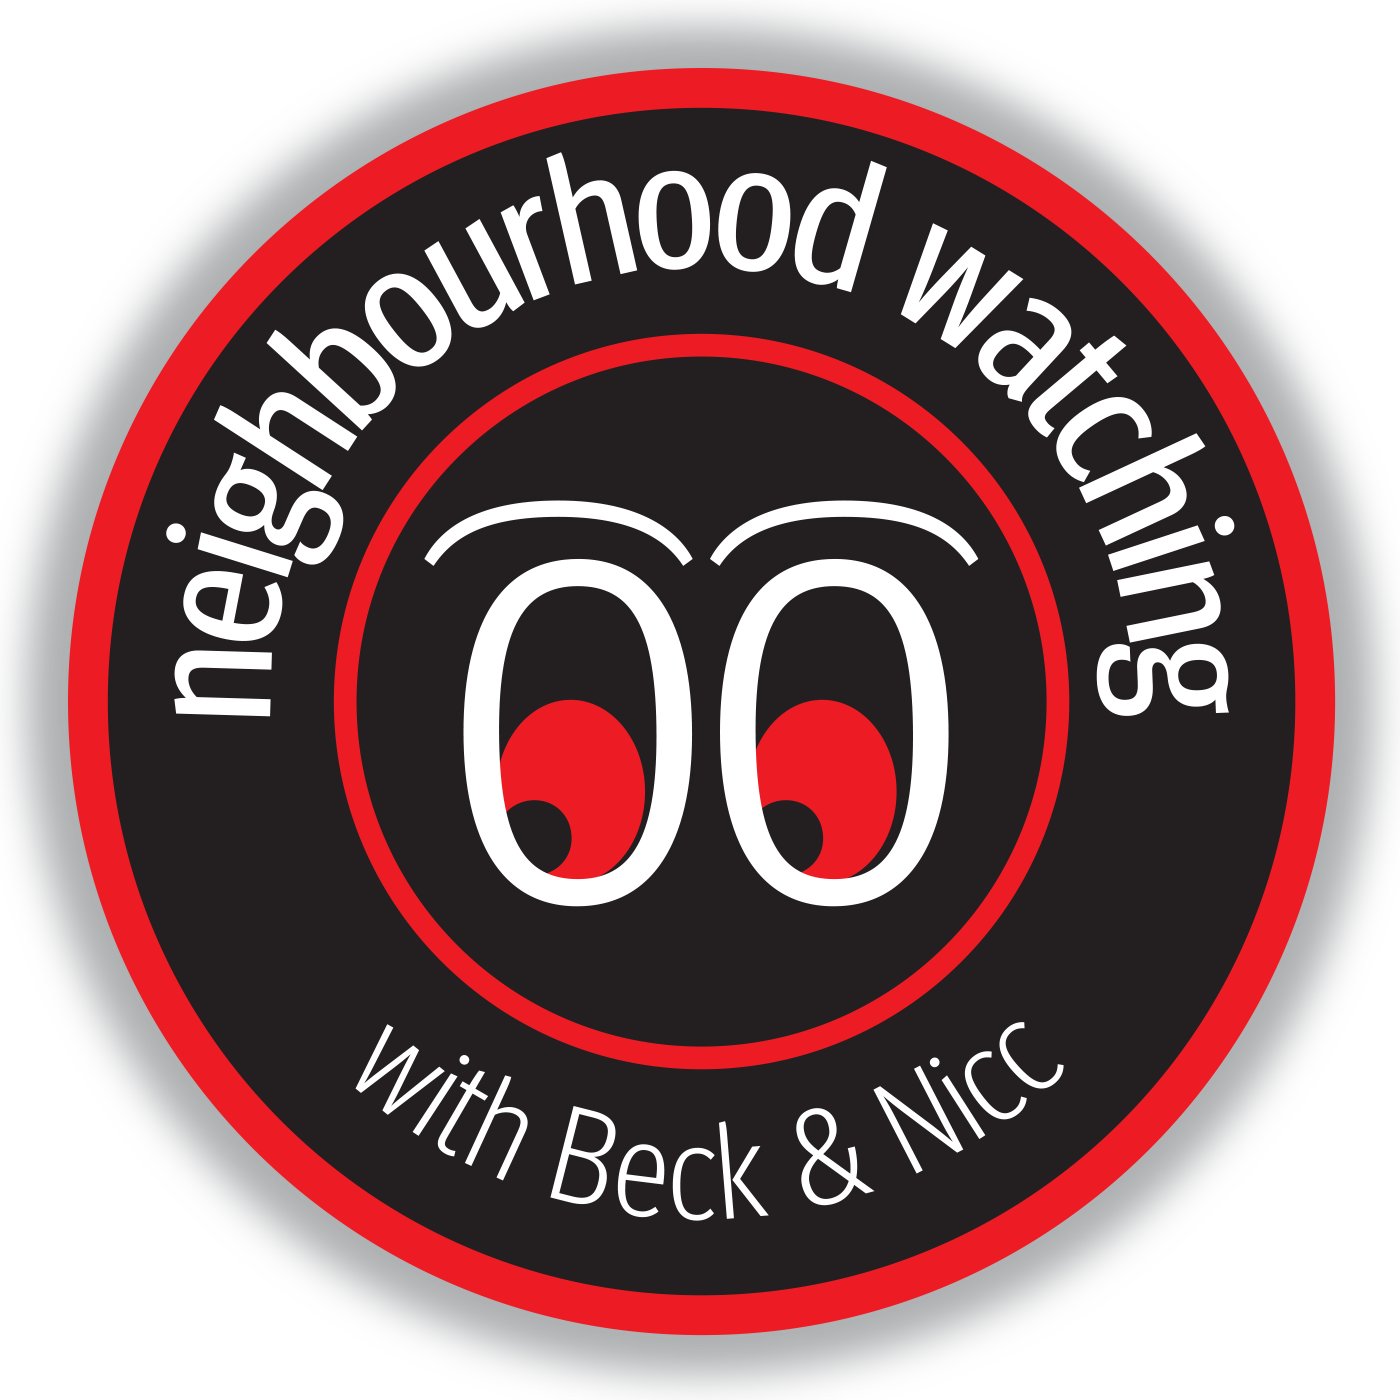 NWWBN - Neighbourhood Watching with Beck and Nicc